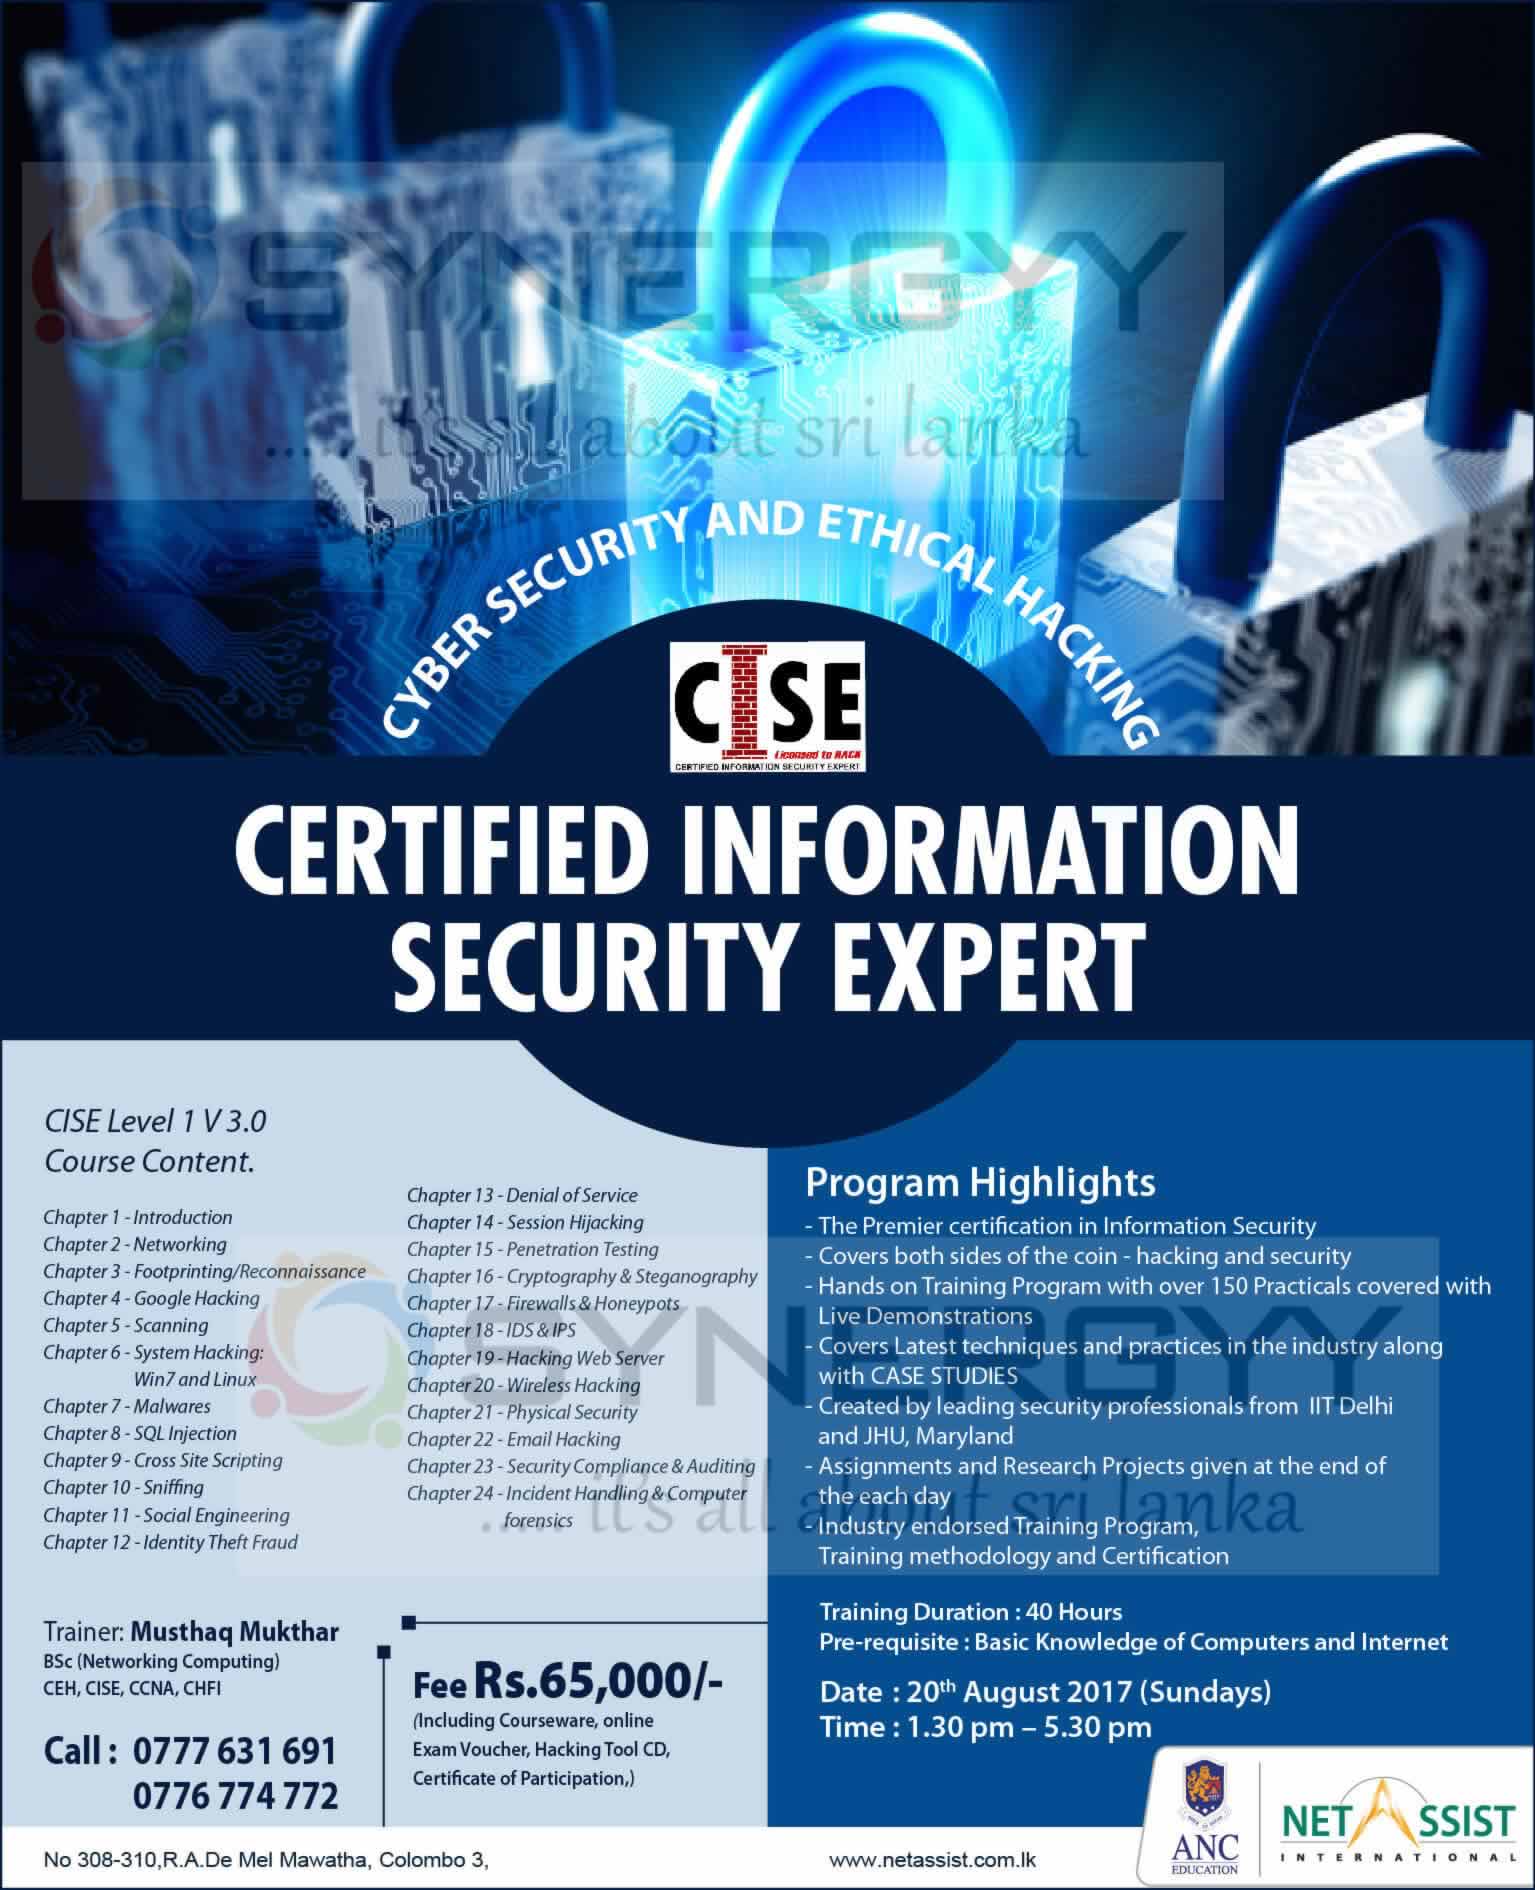 Cyber Security and Ethical Hacking by Certified Information Security Expert – Starting from 20th August 2017